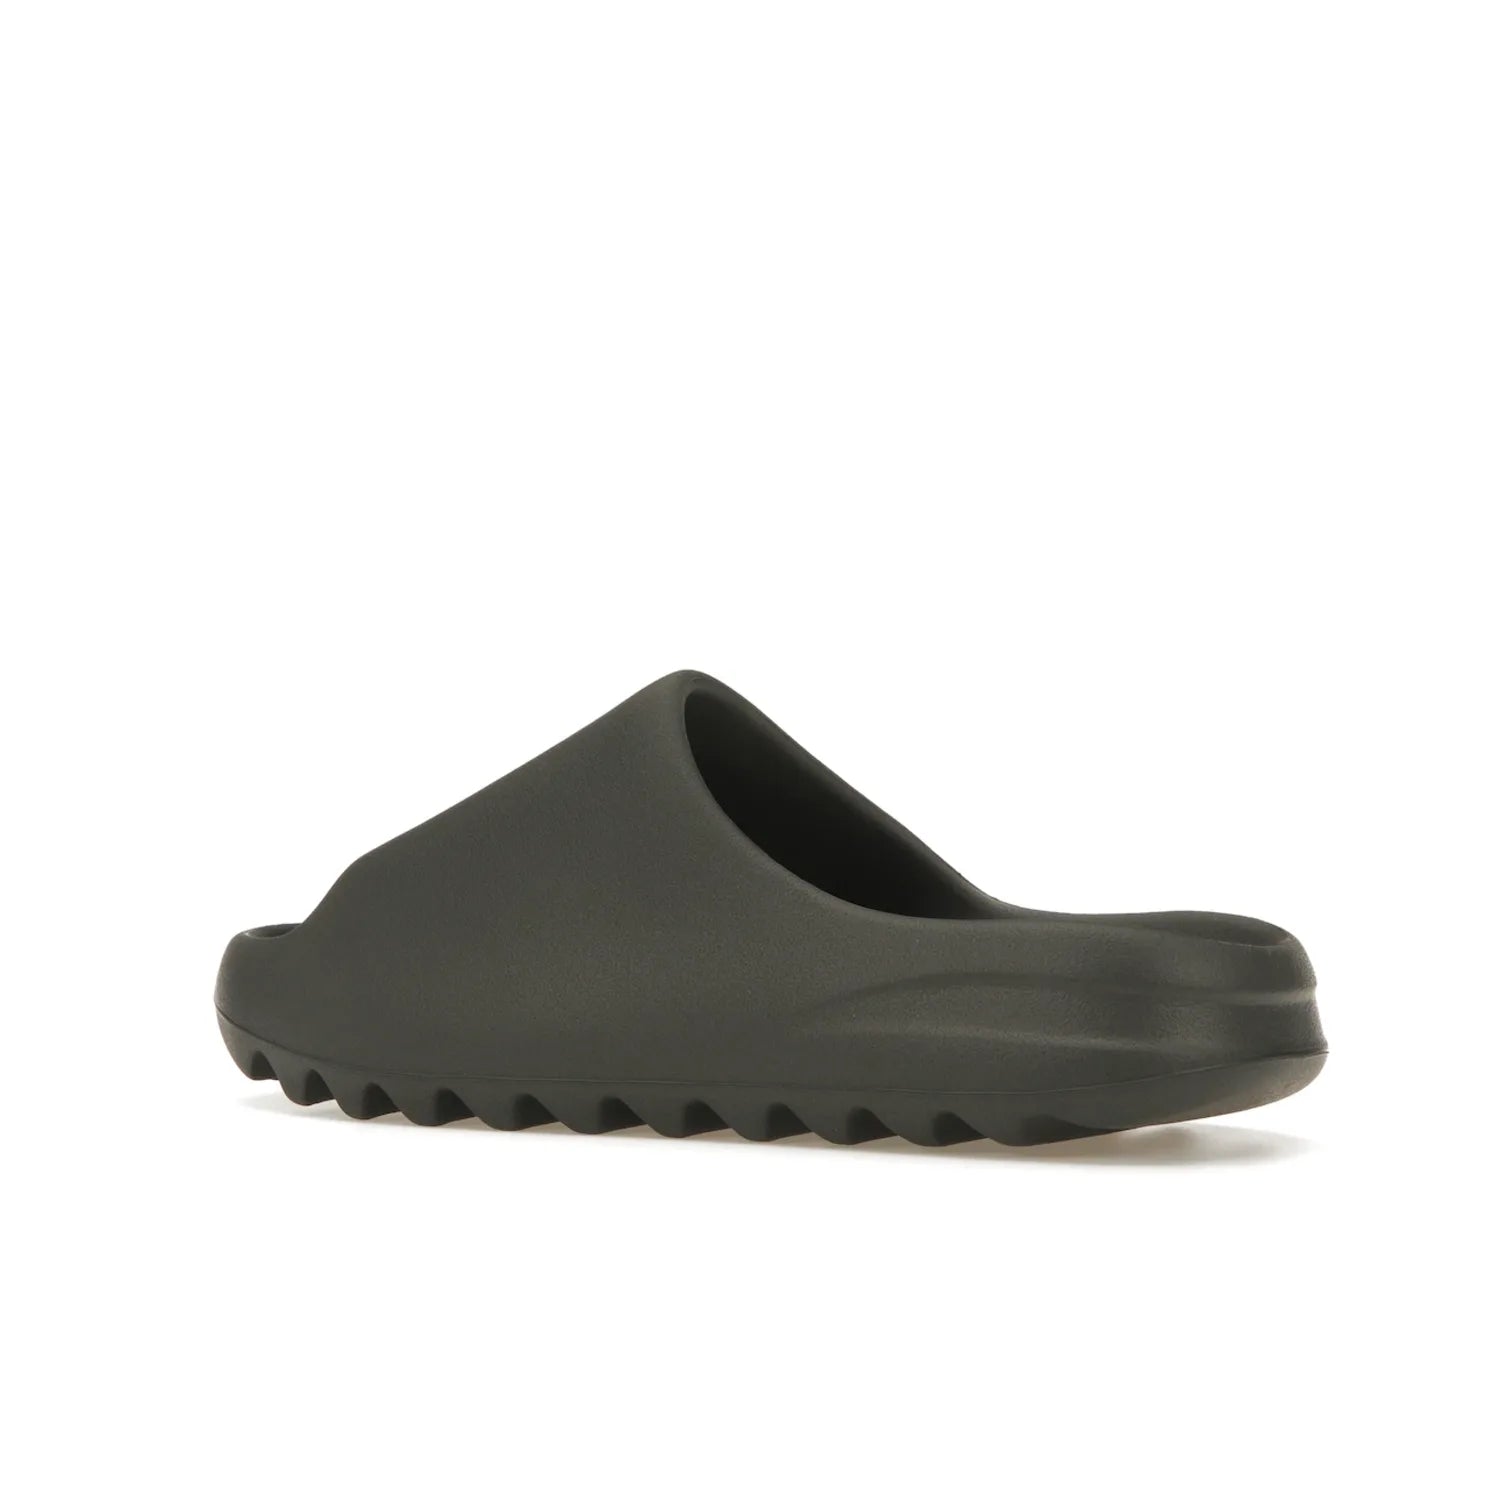 adidas Yeezy Slide Granite - Image 22 - Only at www.BallersClubKickz.com - Introducing the adidas Yeezy Slide Granite with a sleek, soft-to-touch one-piece upper – perfect for making a statement with its minimalistic design and luxurious comfort. Get yours now for only $70.